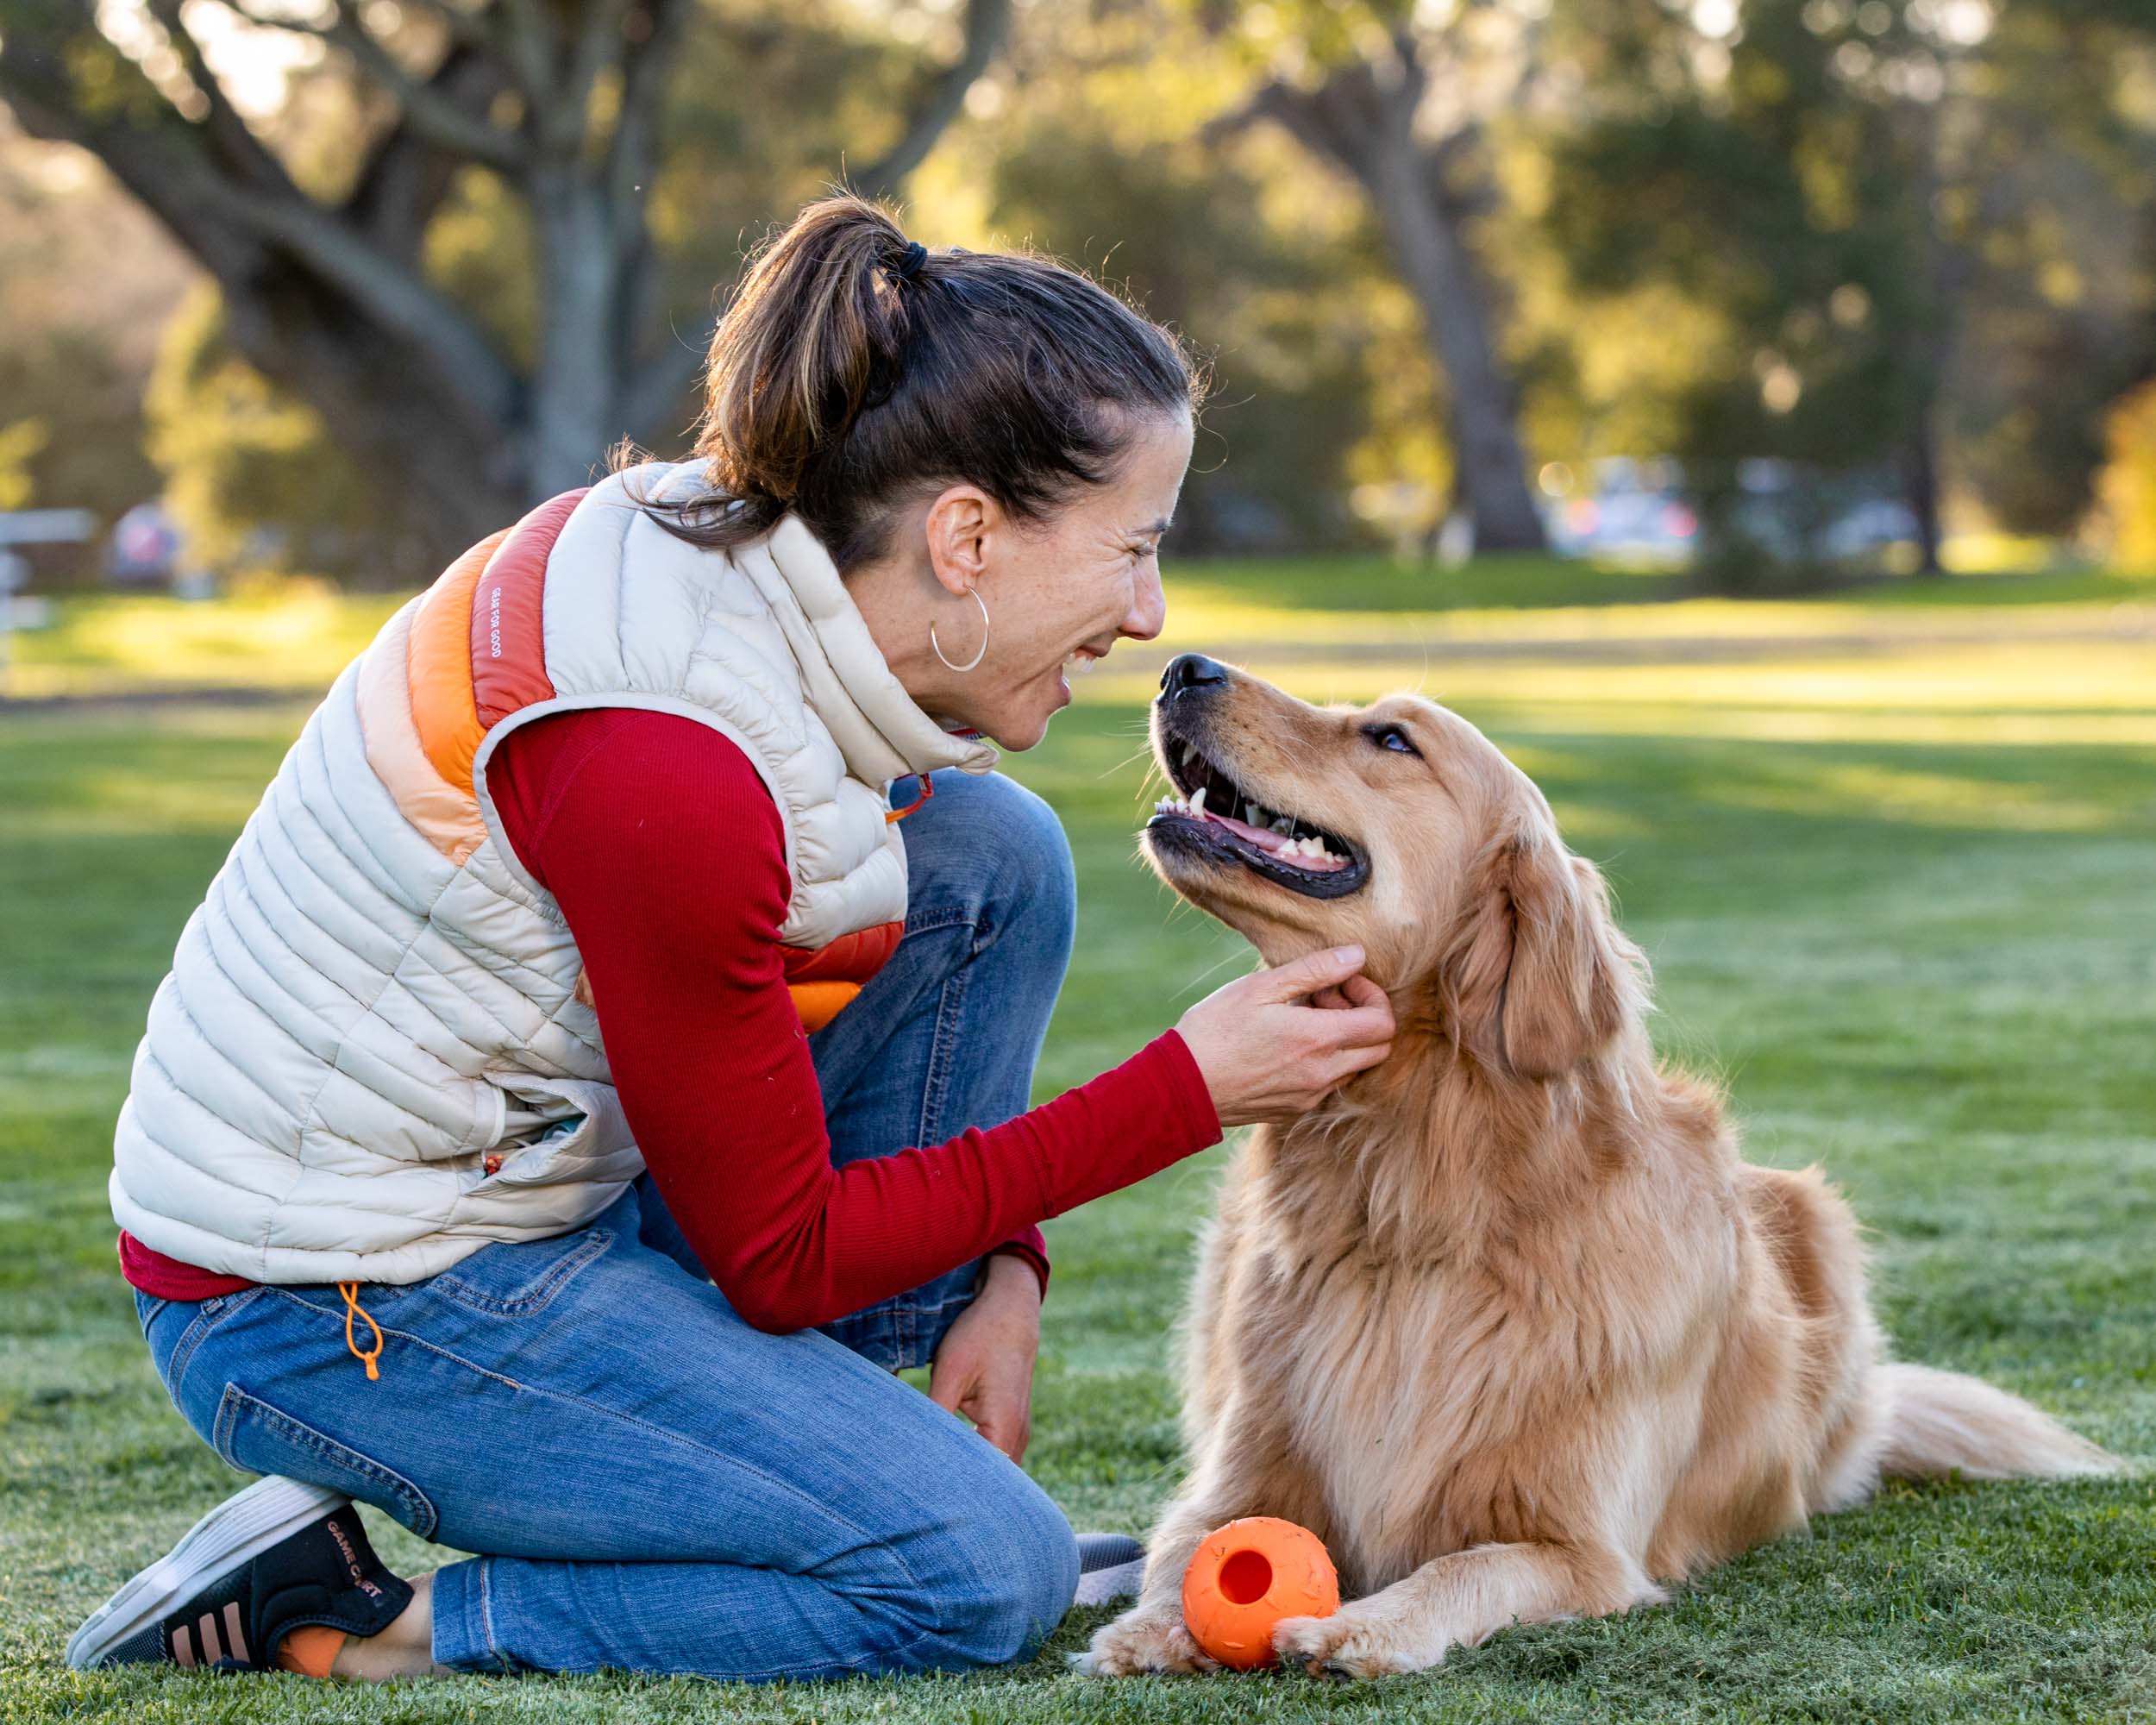 Pet and People Photography | Woman Petting Her Dog in Park by Mark Rogers